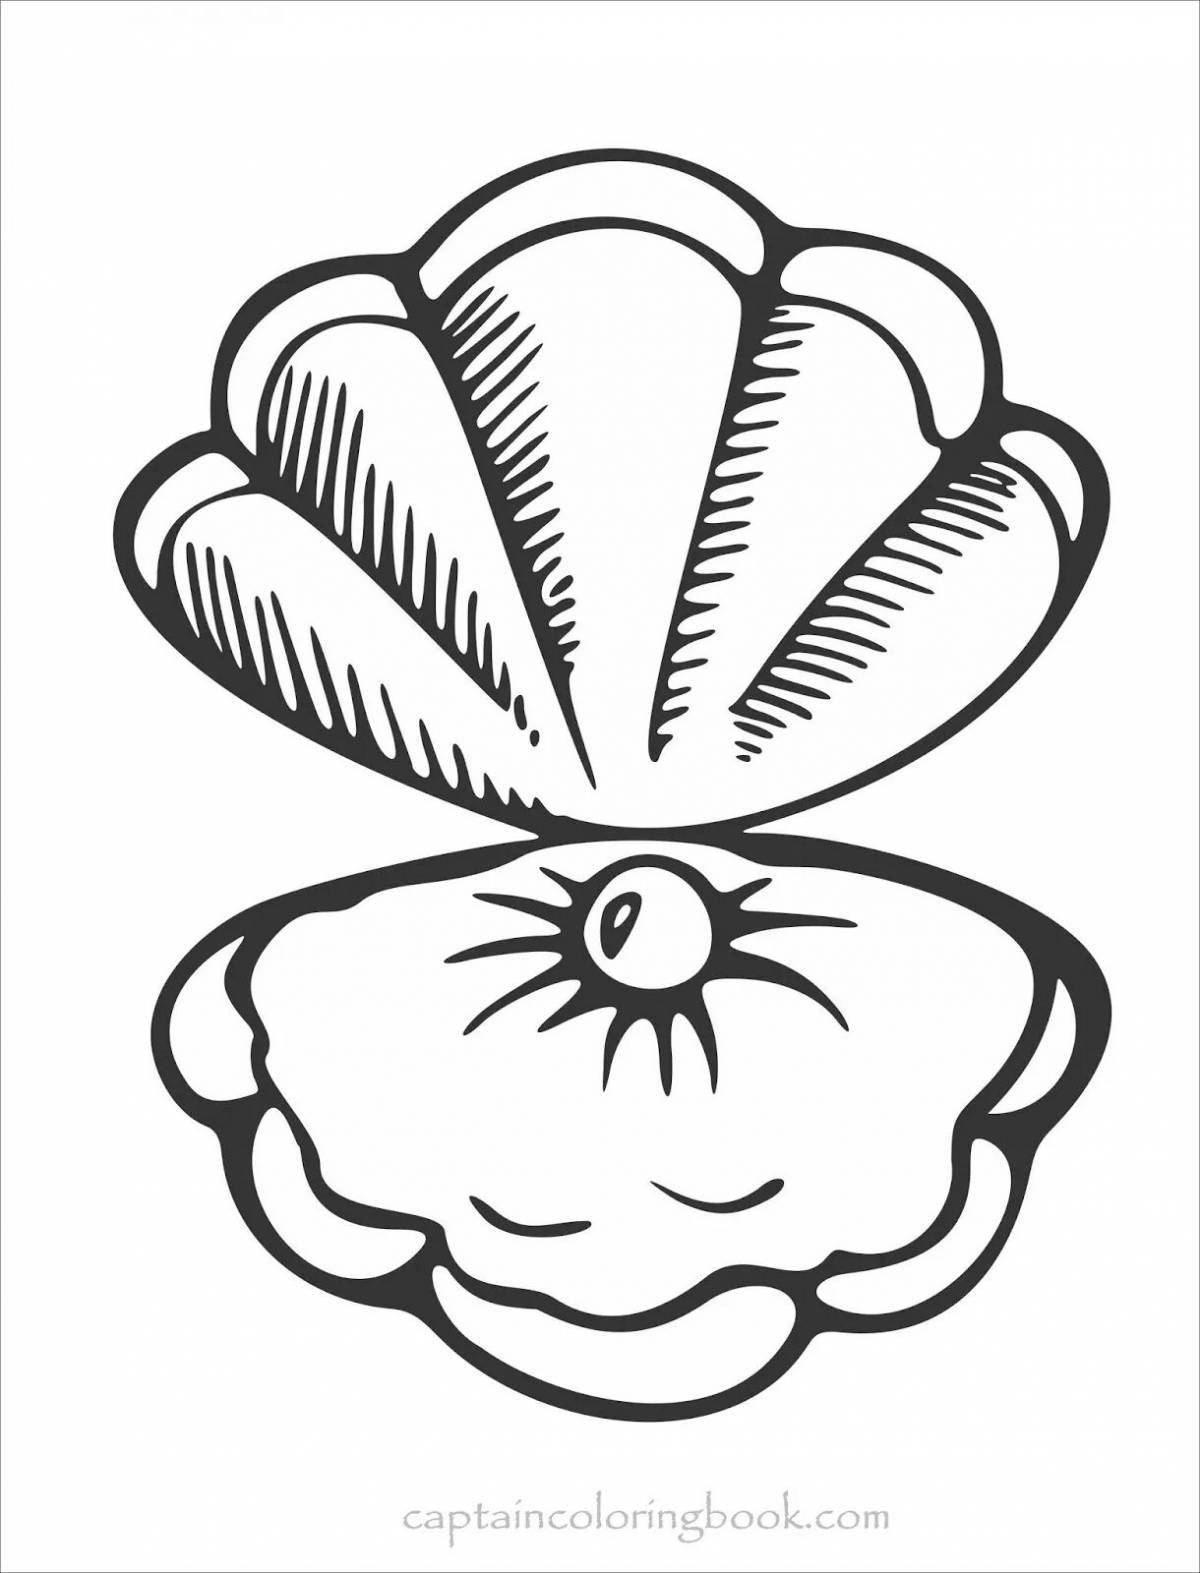 Adorable seashell coloring book for kids